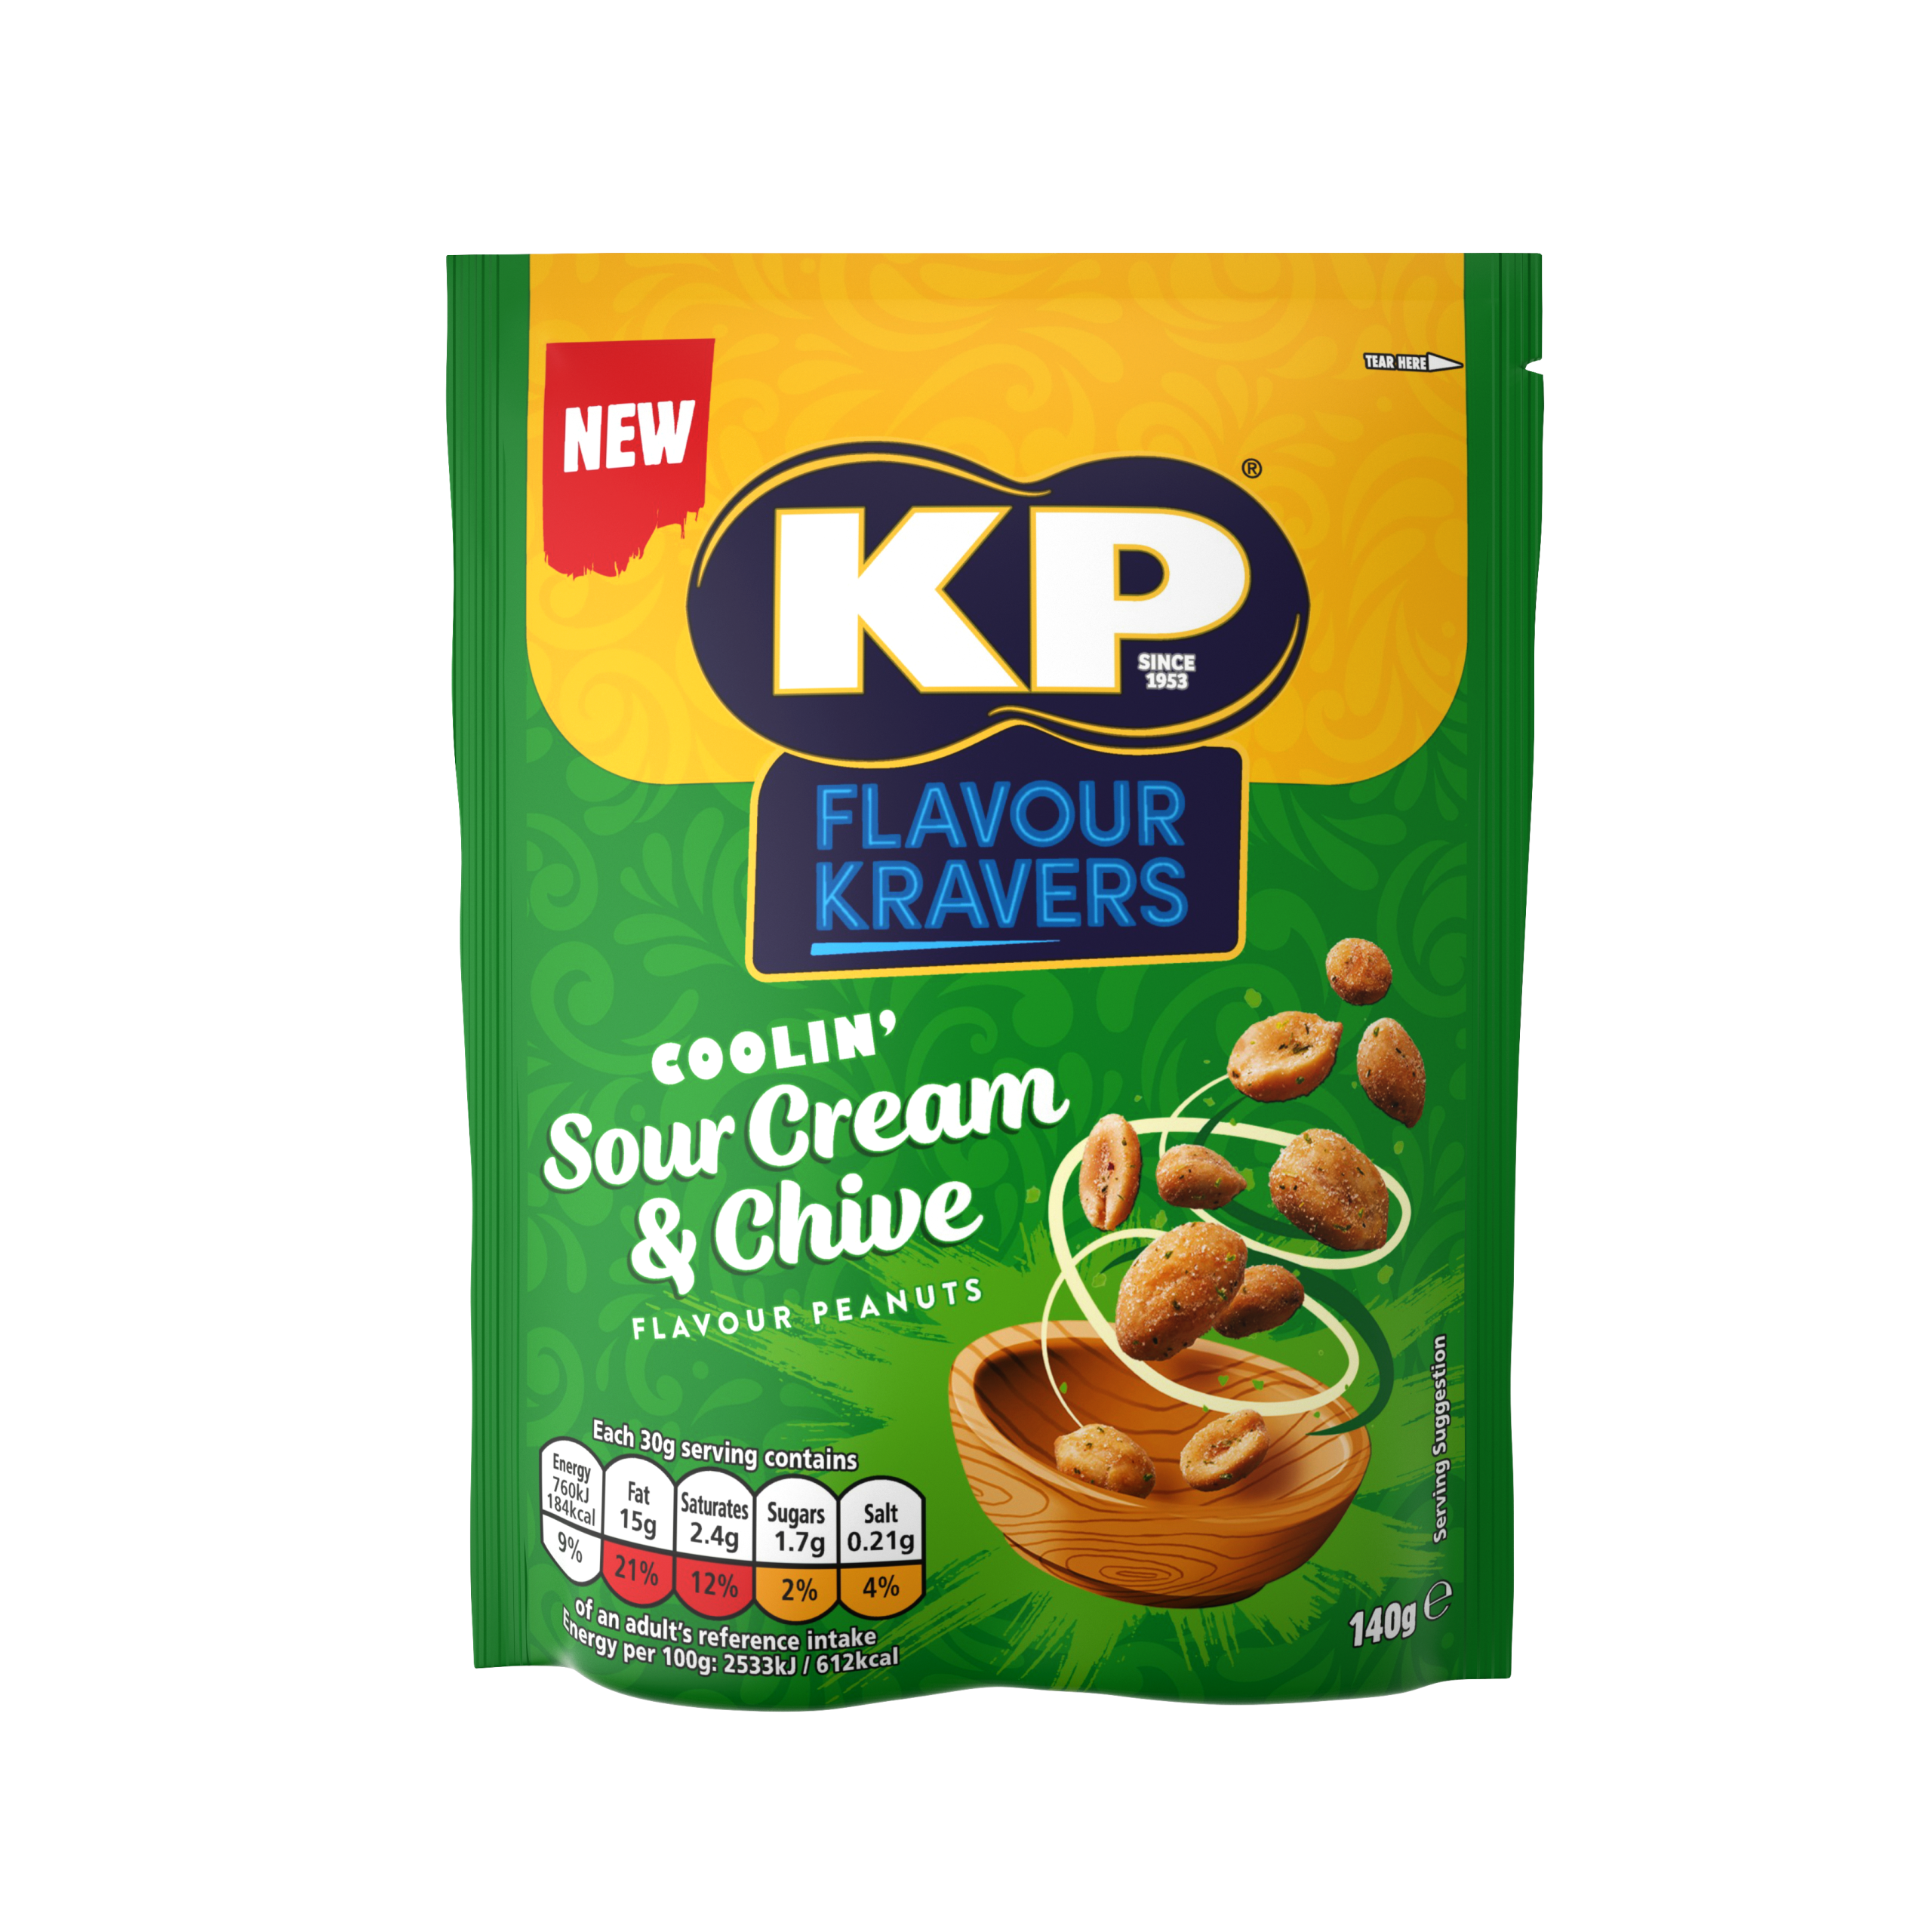 KP Snacks launches new Sour Cream & Chive Flavour Kravers